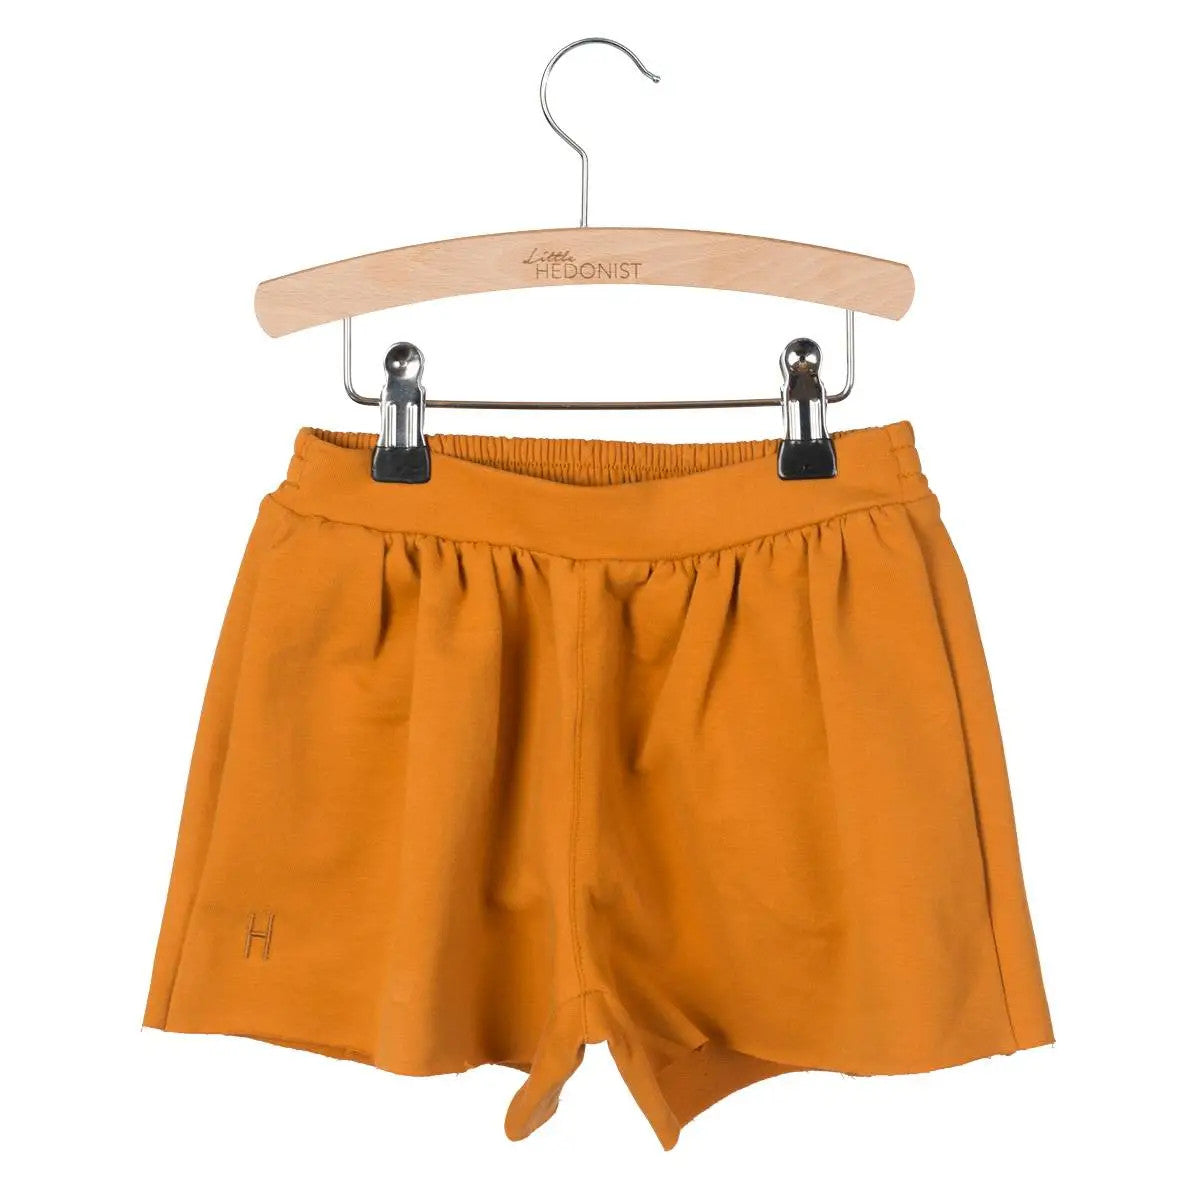 Little Hedonist organic pleated shorts with flowing cut and hidden pockets in Pumpkin Spice. Sustainable fashion for kids.